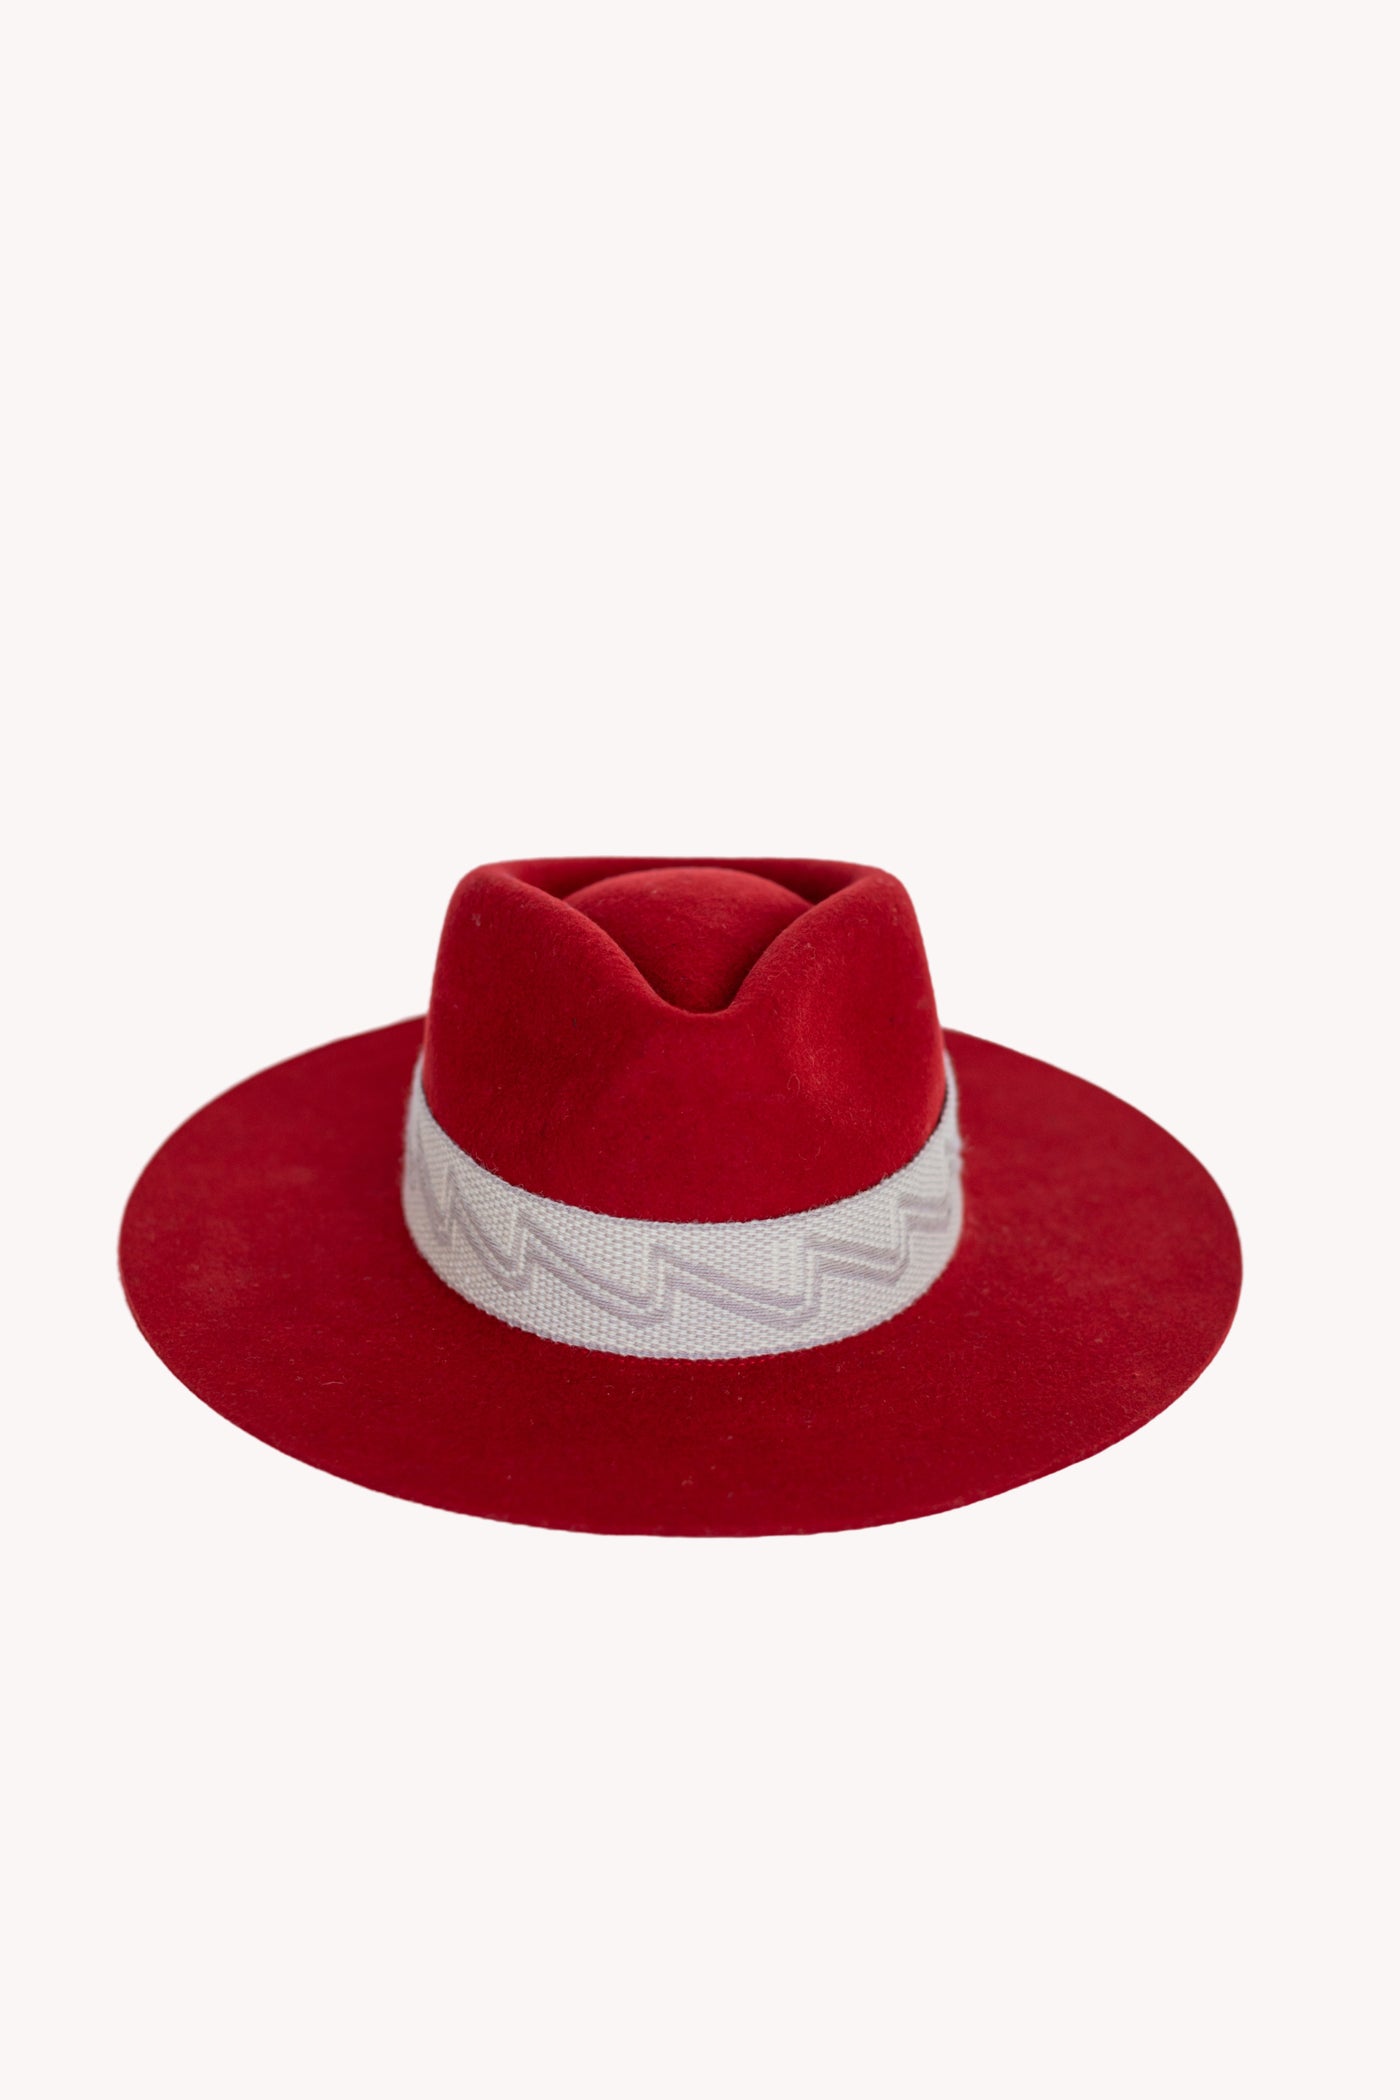 Red Western Hat with Commitment Intention Band Removable Intention Hat Textile Band